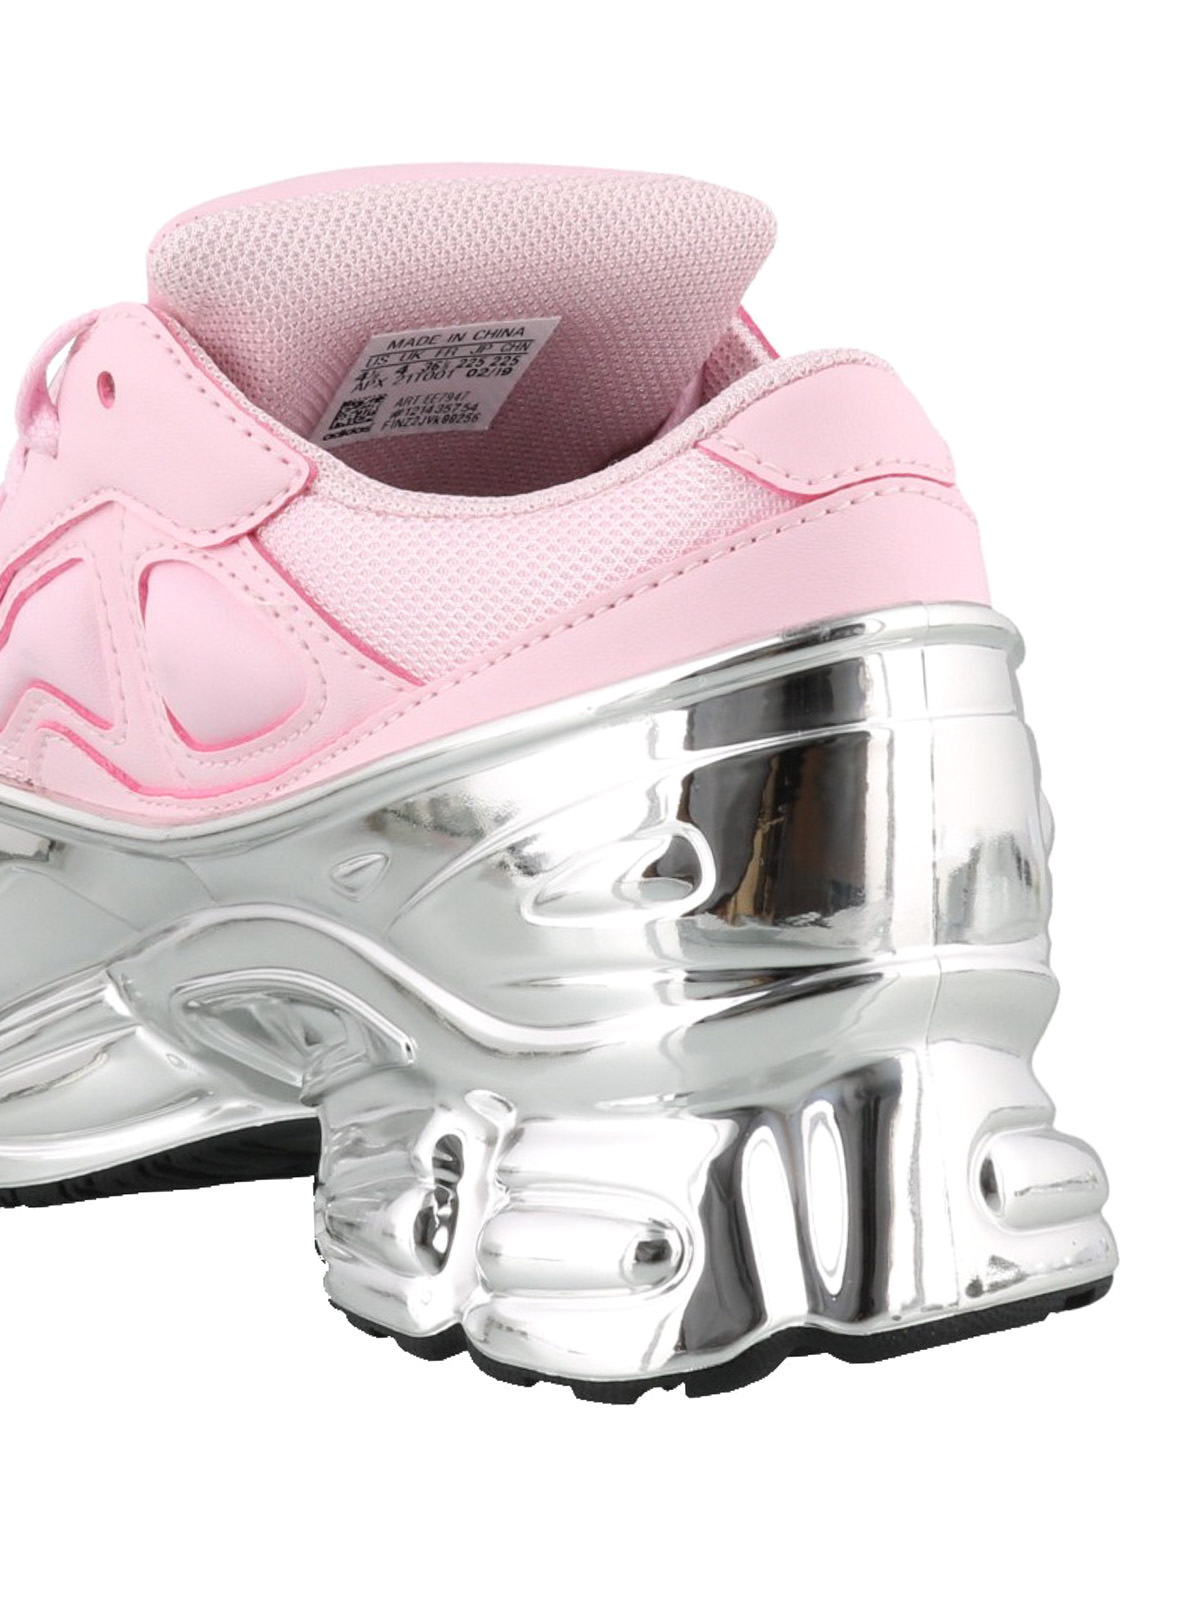 Raf Simons Adidas - Ozweego RS pink and silver chunky sneakers - EE7947PINKSILVERSILVER